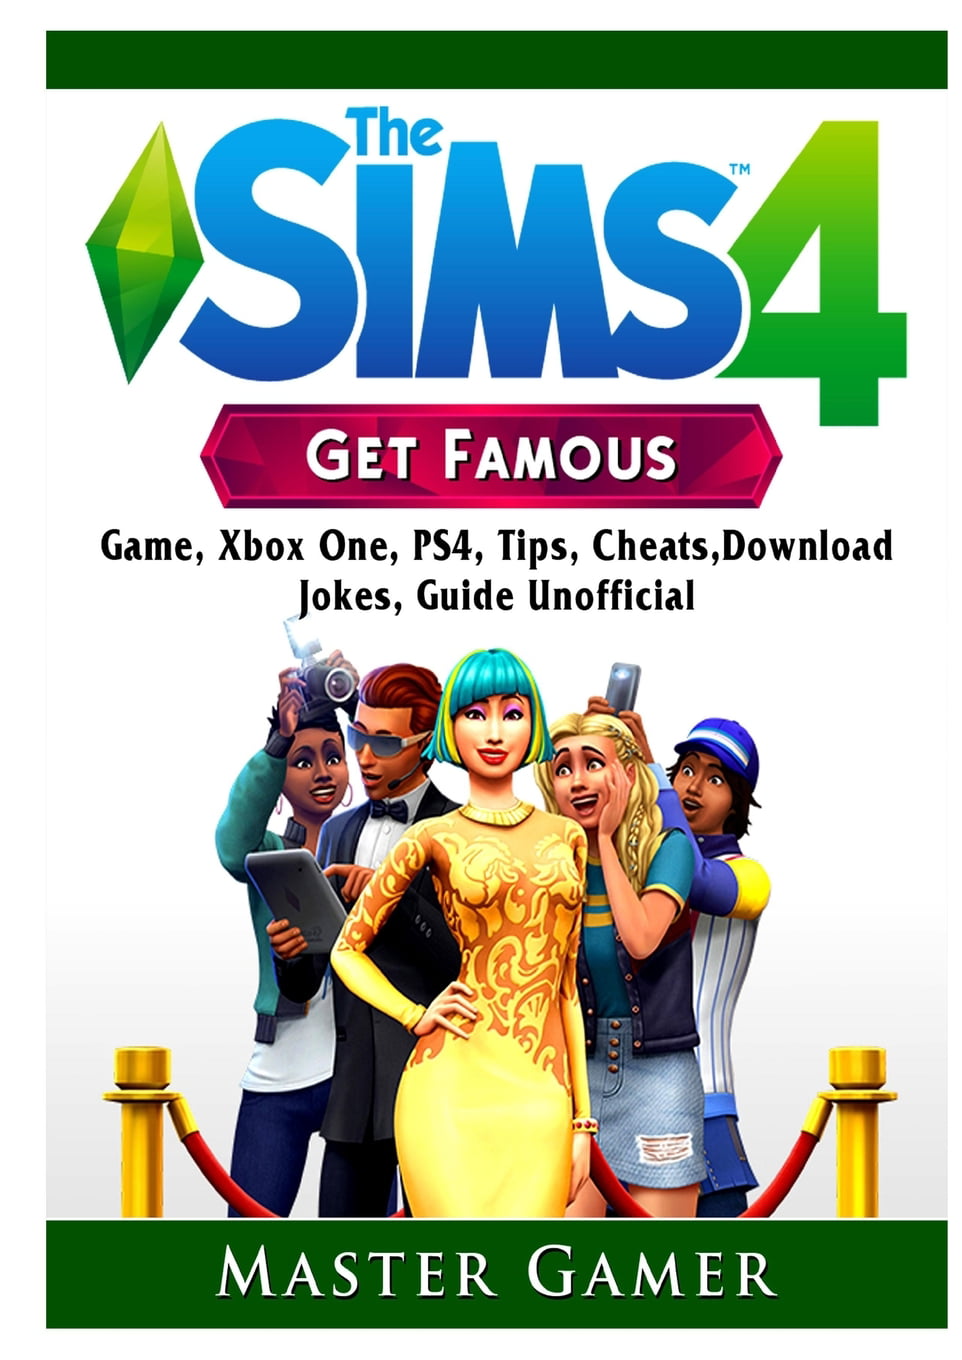 The Sims 4 Get Famous Game, Xbox One, PS4, Tips, Cheats, Download, Jokes,  Guide Unofficial (Paperback) 